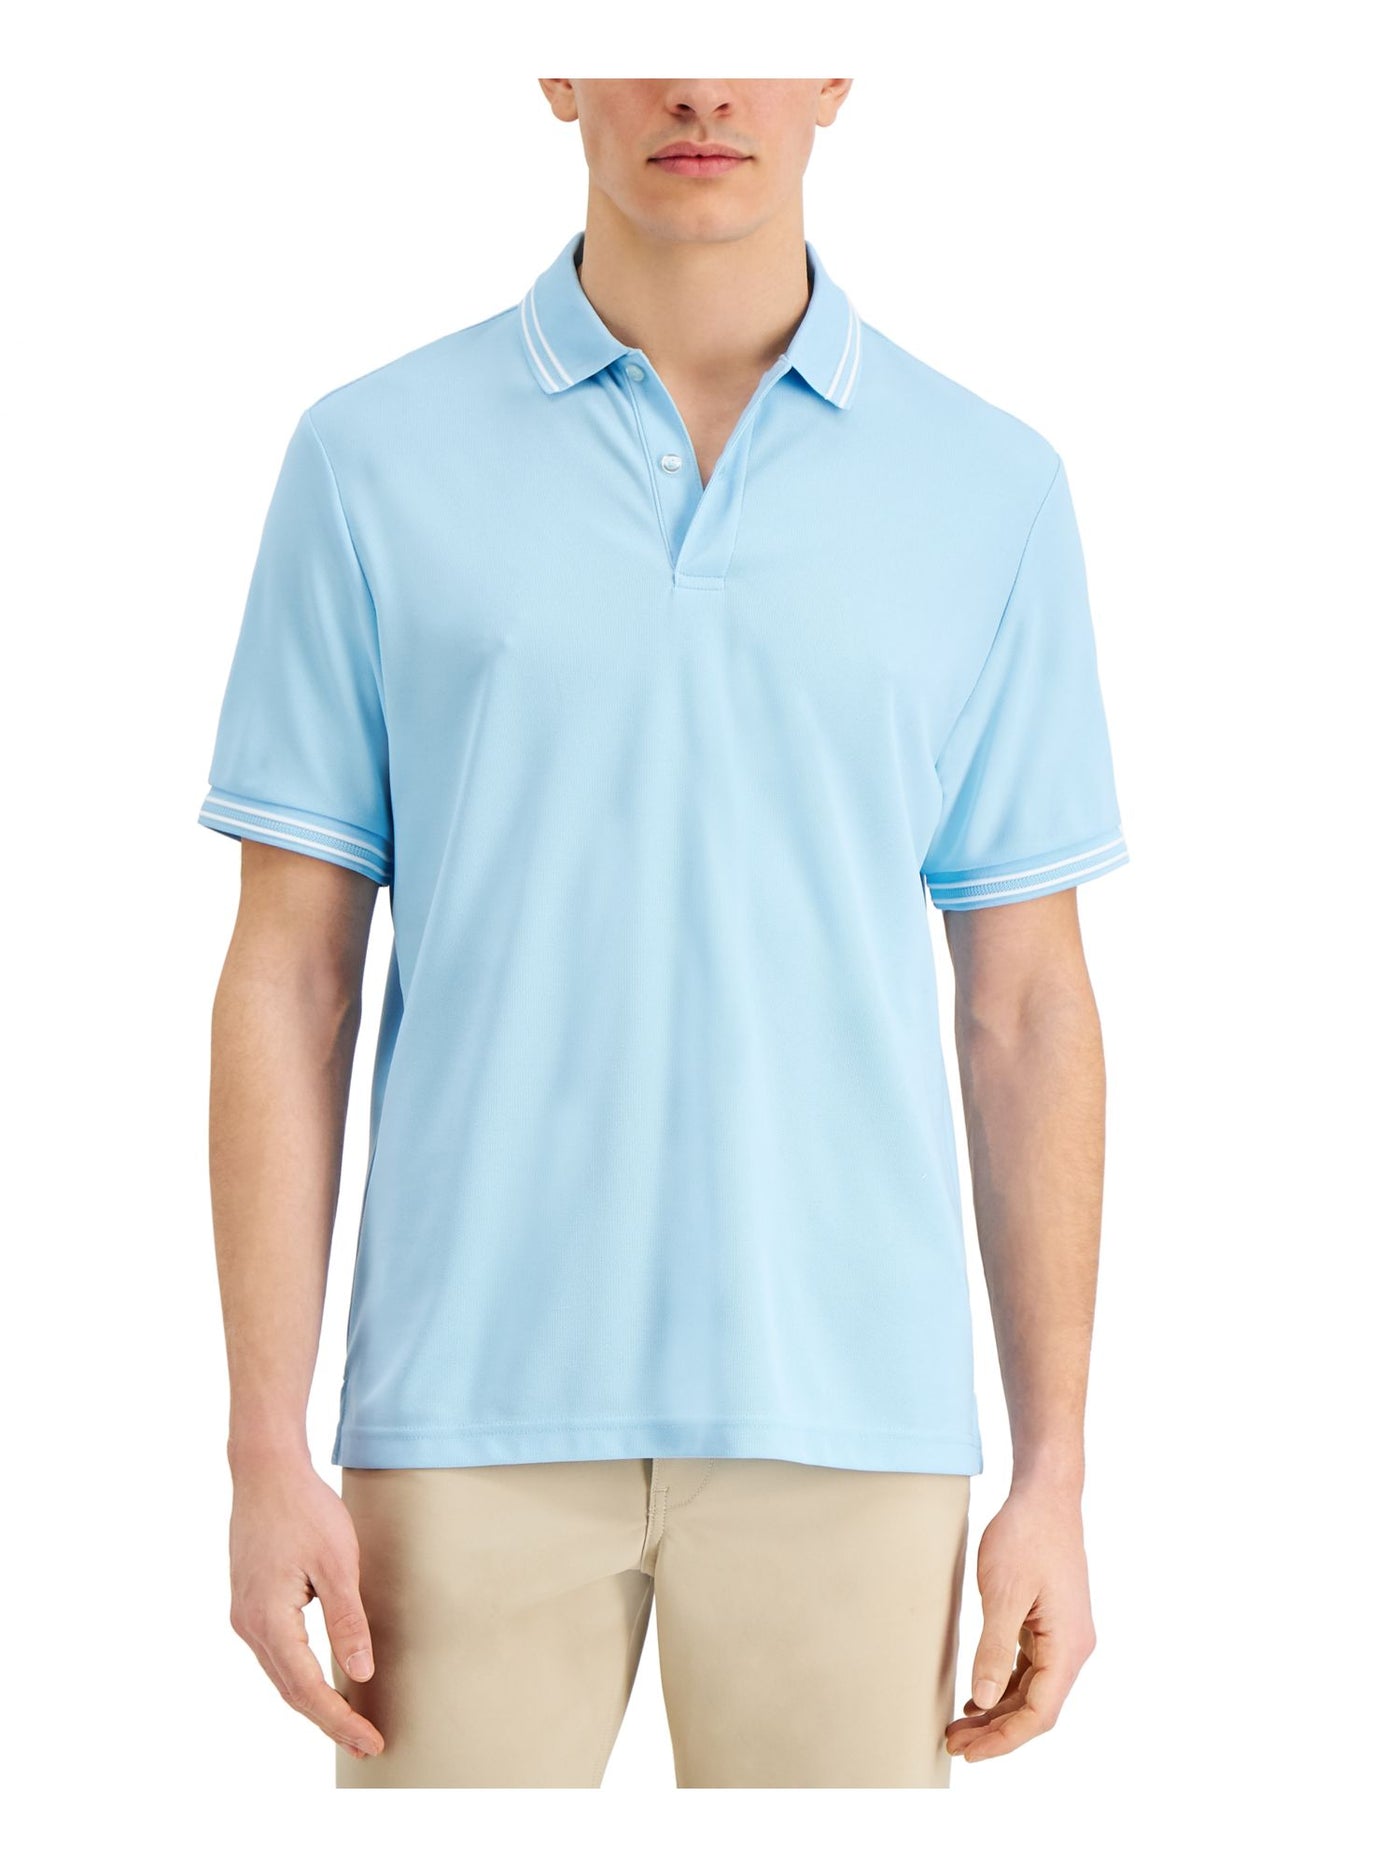 CLUBROOM Mens Light Blue Classic Fit Moisture Wicking Polo S